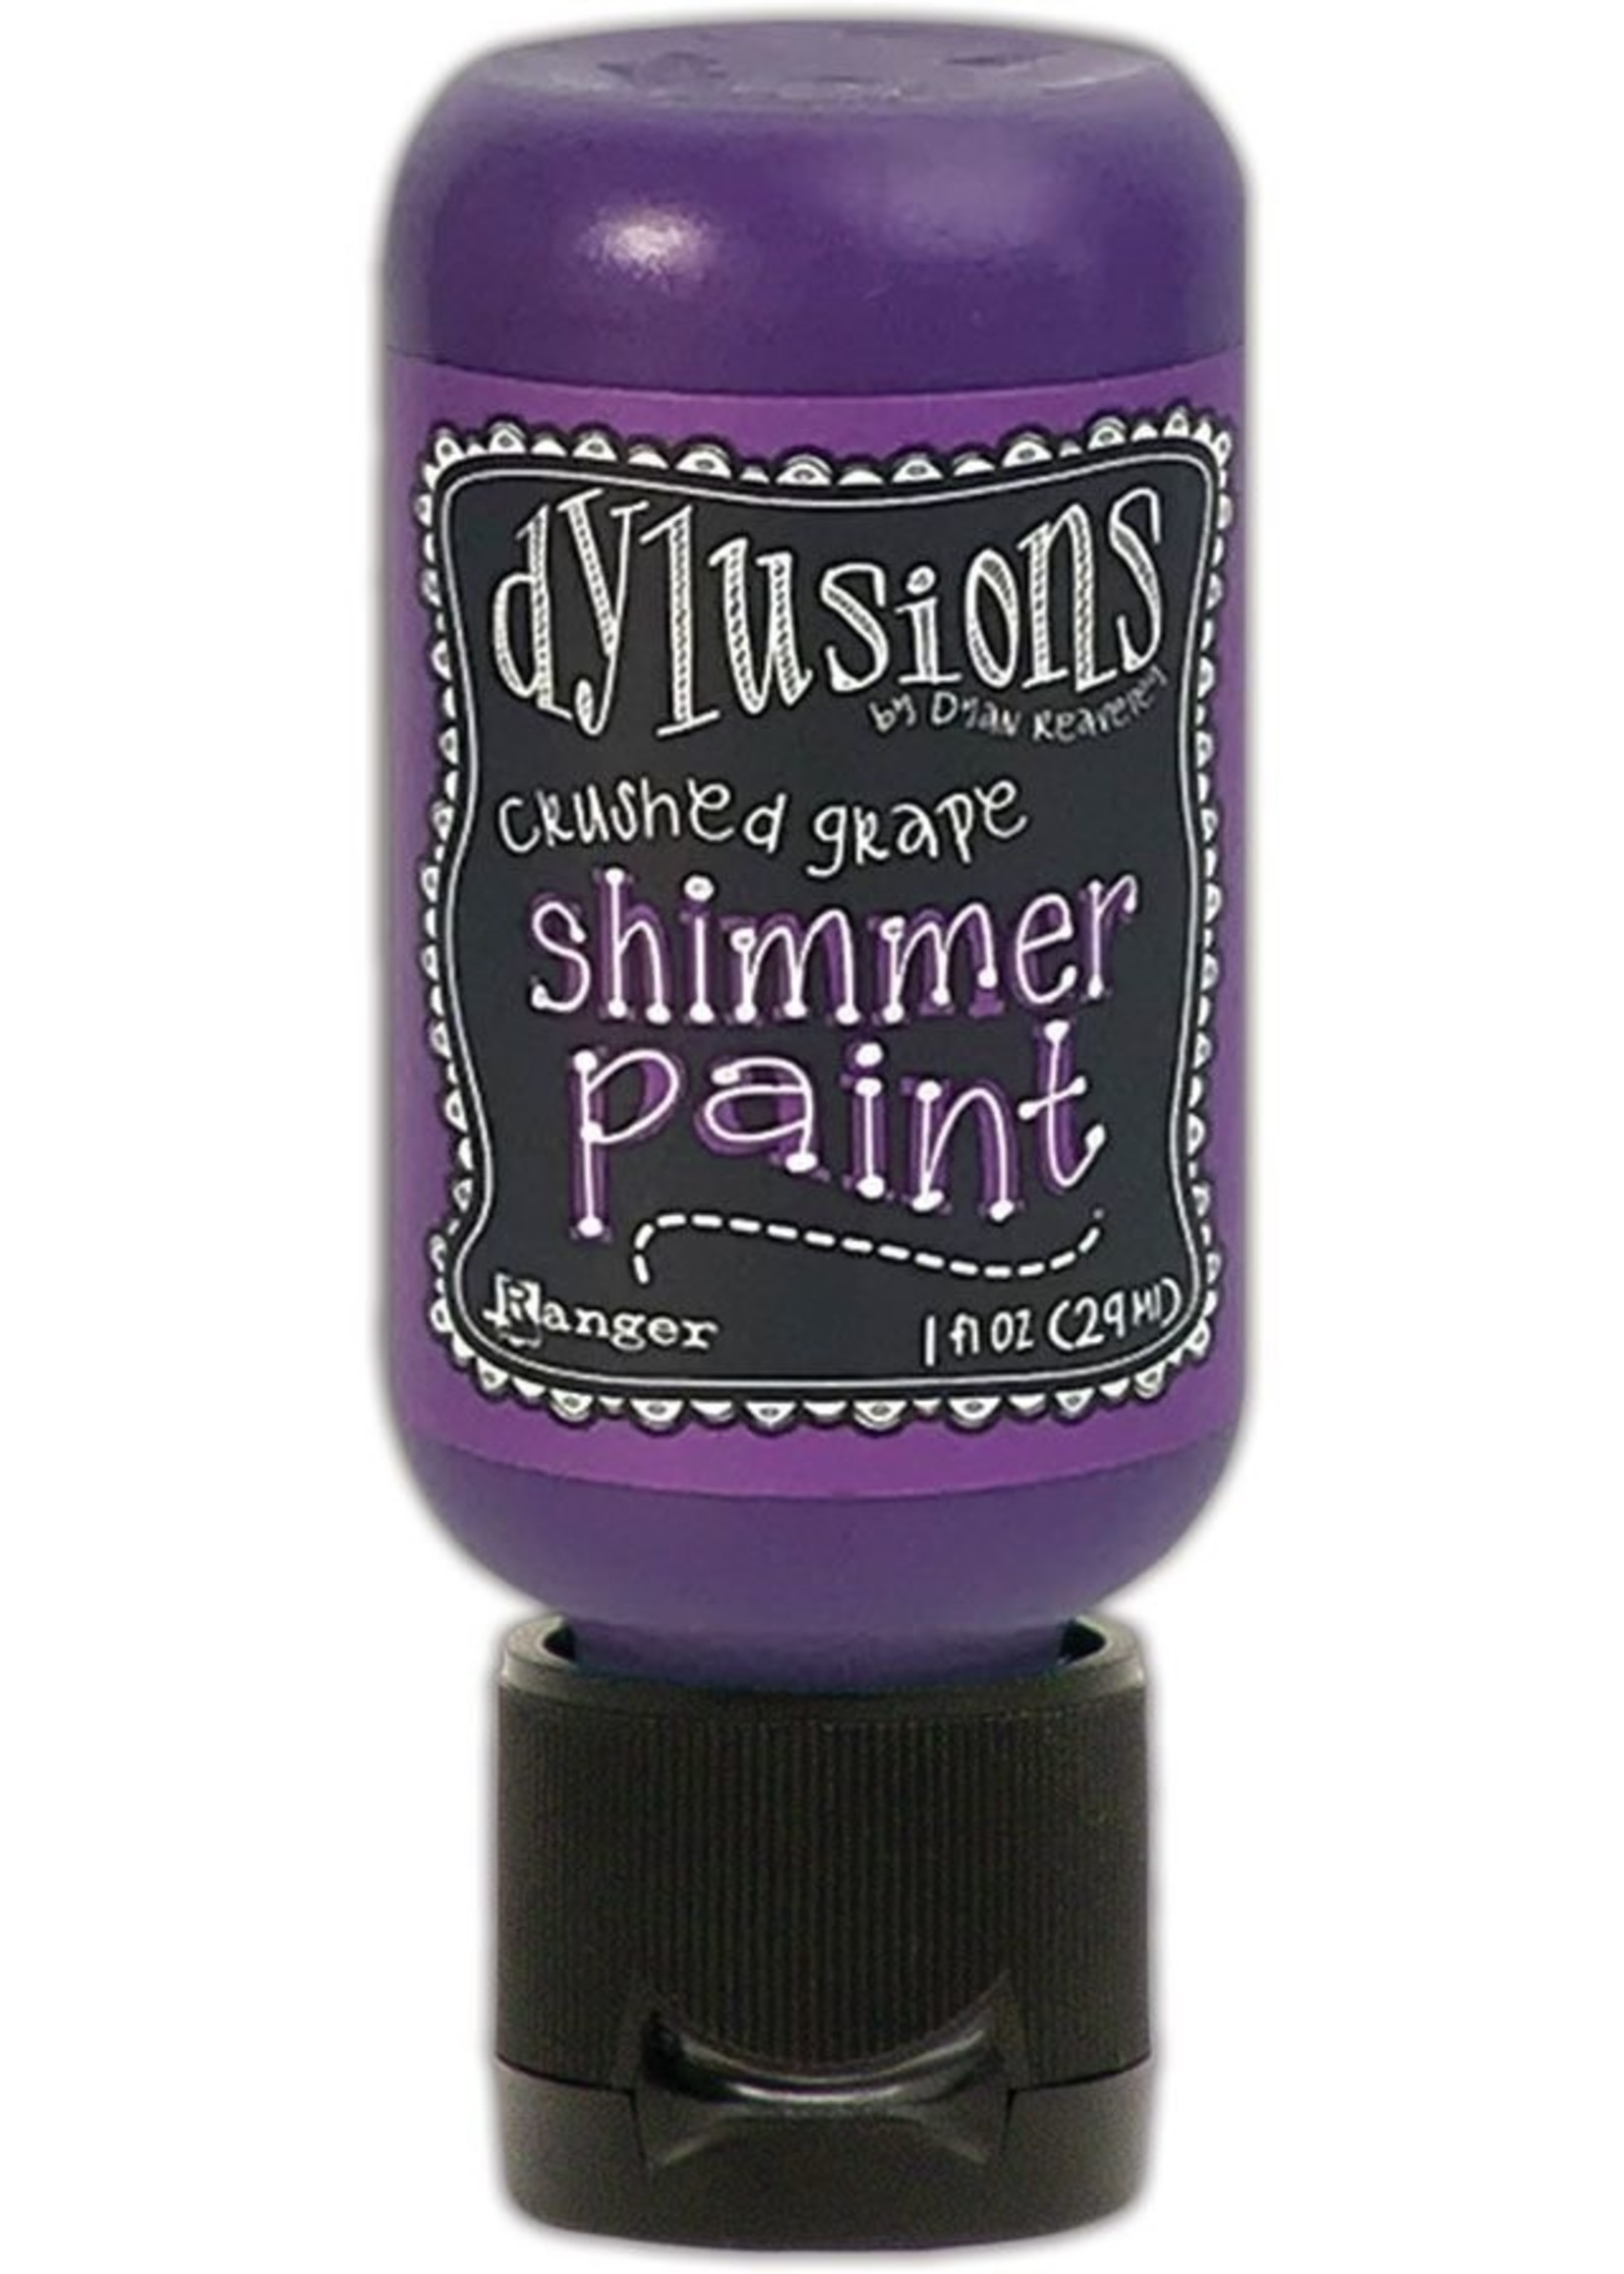 Ranger Dylusions Shimmer Paint, Crushed Grape